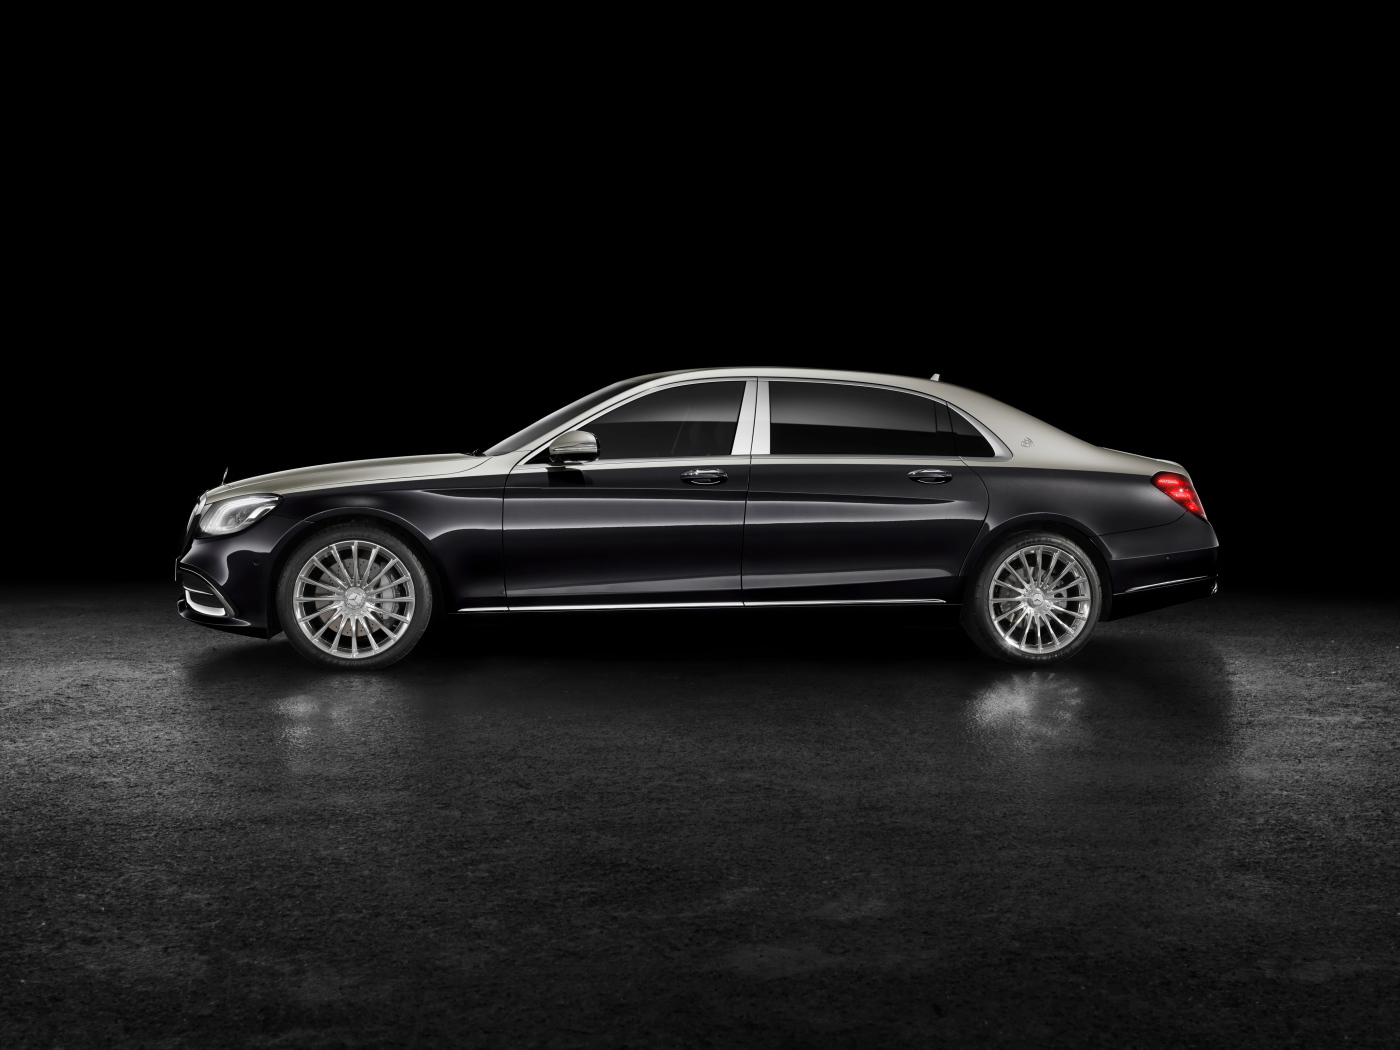 Black car Mercedes Benz Maybach S 560 2018 side view